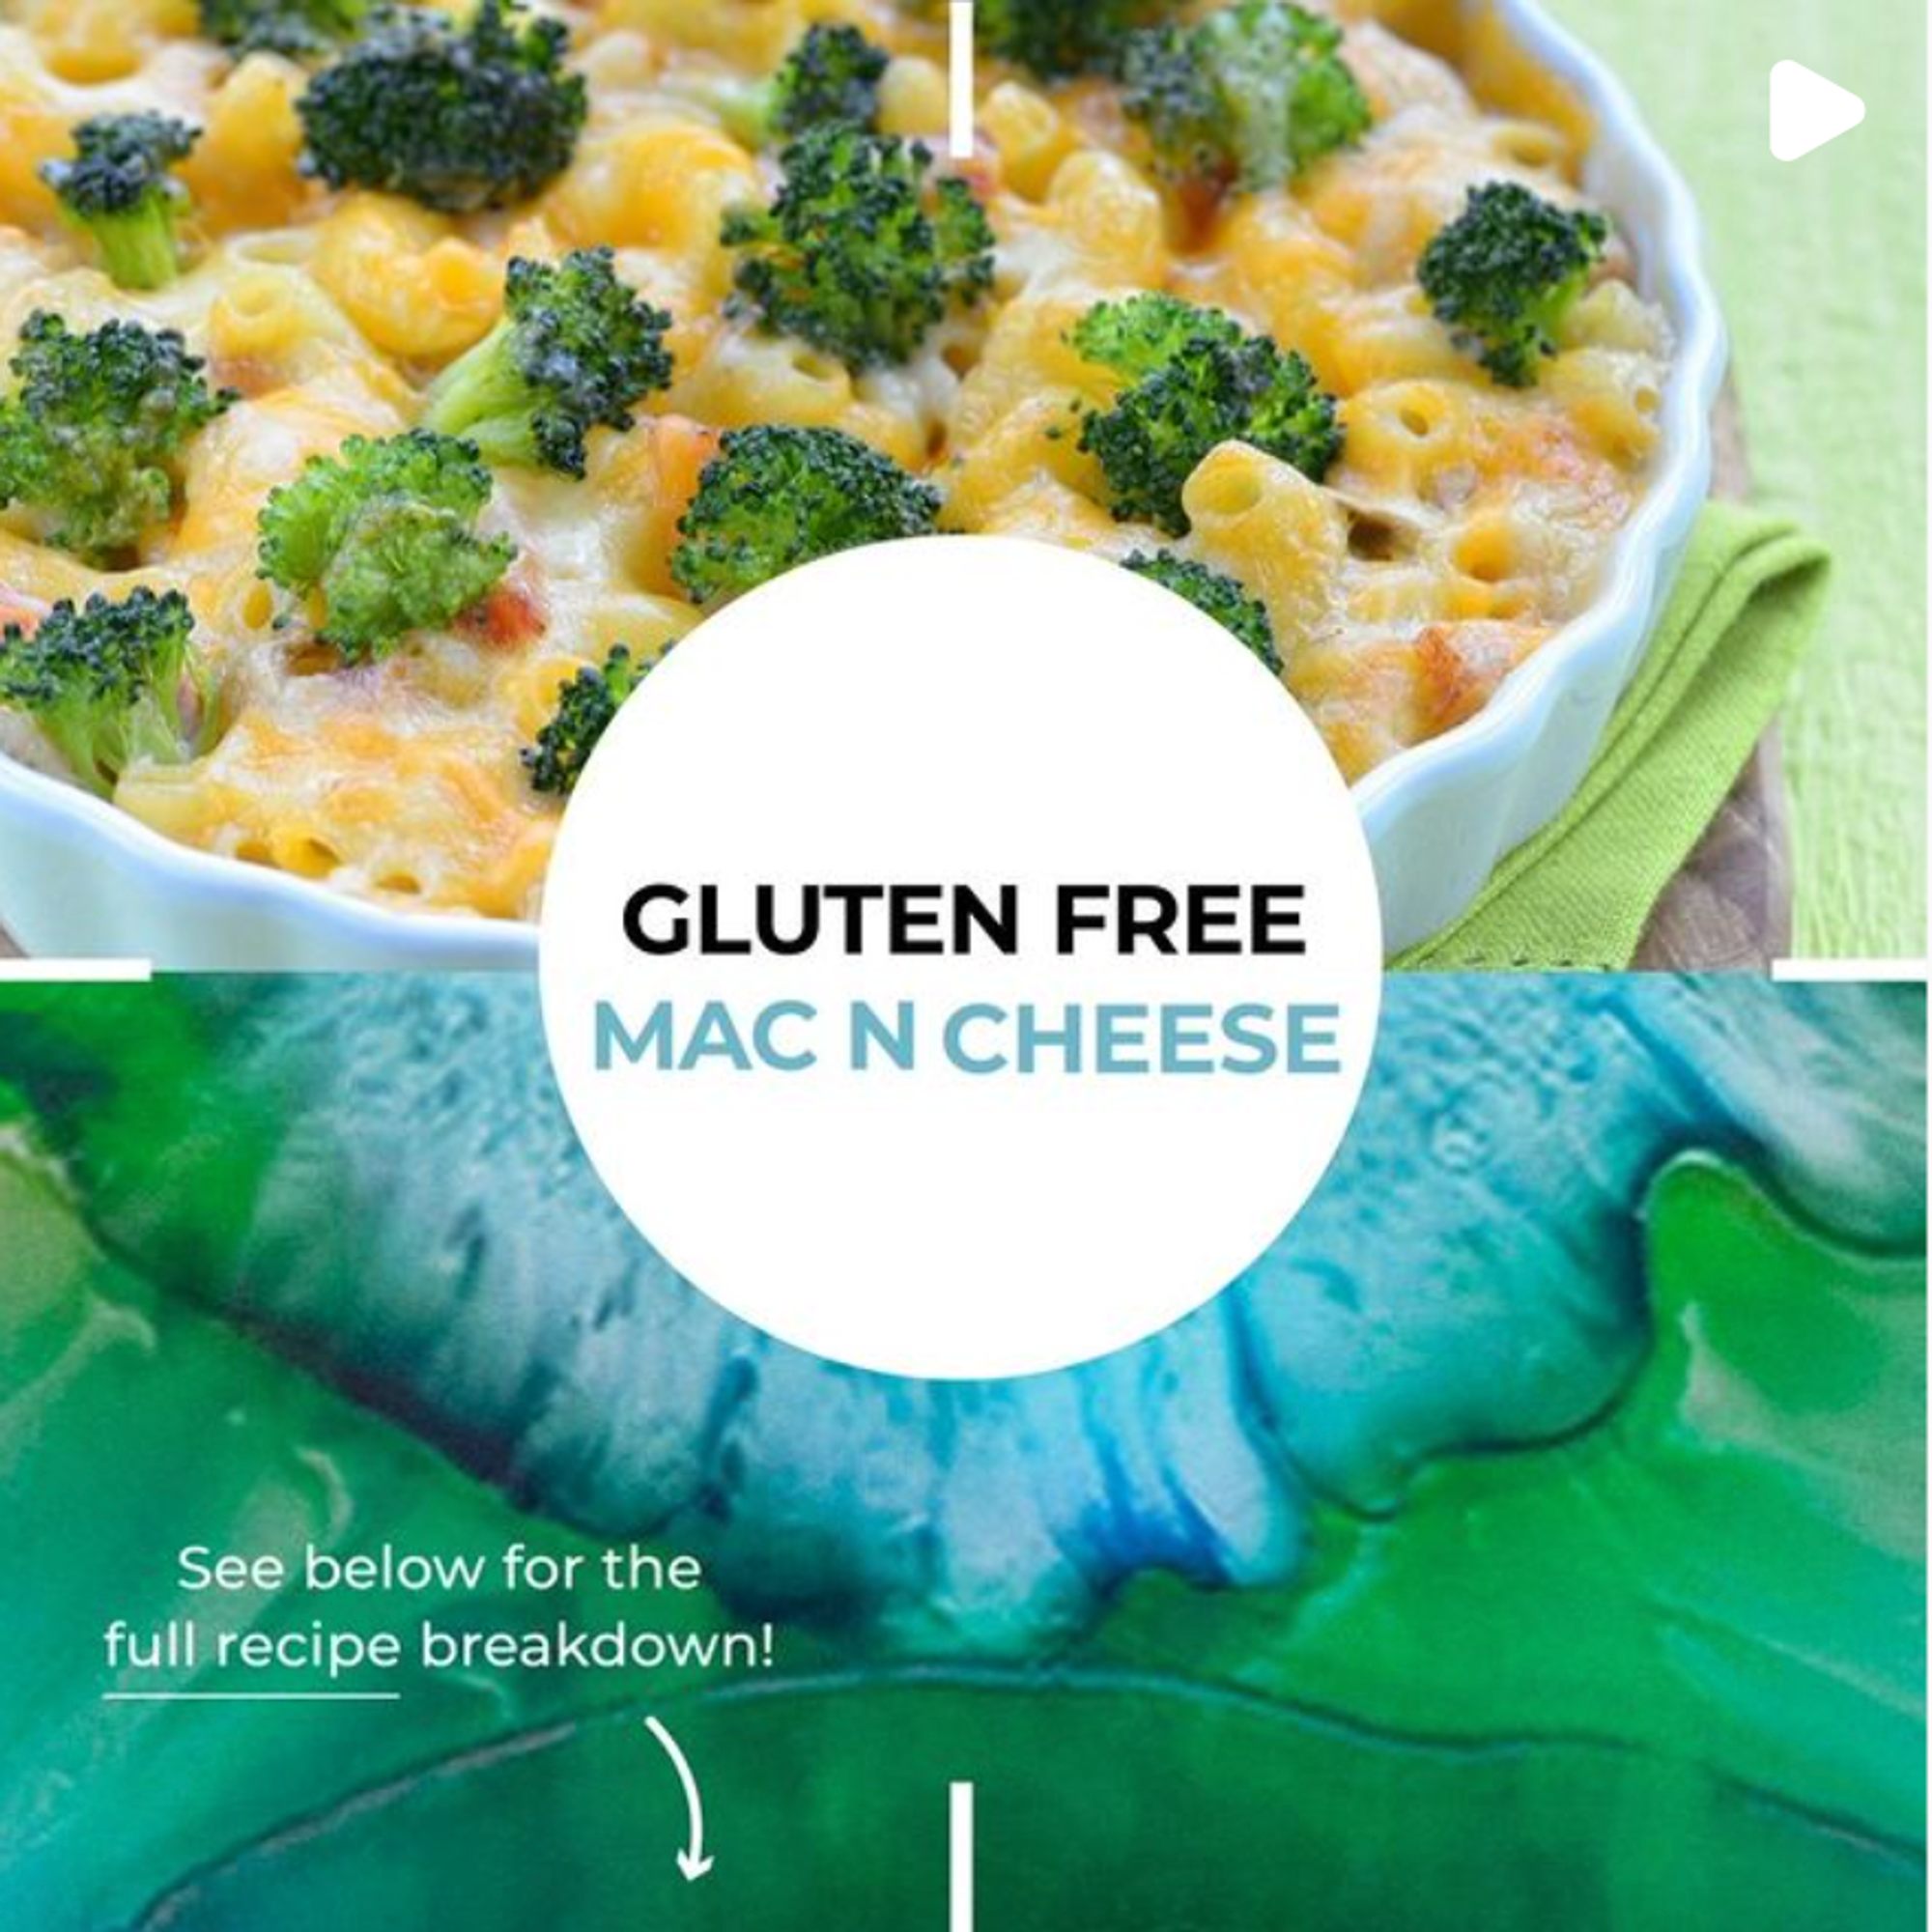 Figure 12: A new Instagram post from PrecisionBiotics. It is extremely colourful and juxtaposes a bowl of gluten free mac n cheese with the new Alflorex watercolour-esq branding. Underneath it says “See below for the full recipe breakdown.”